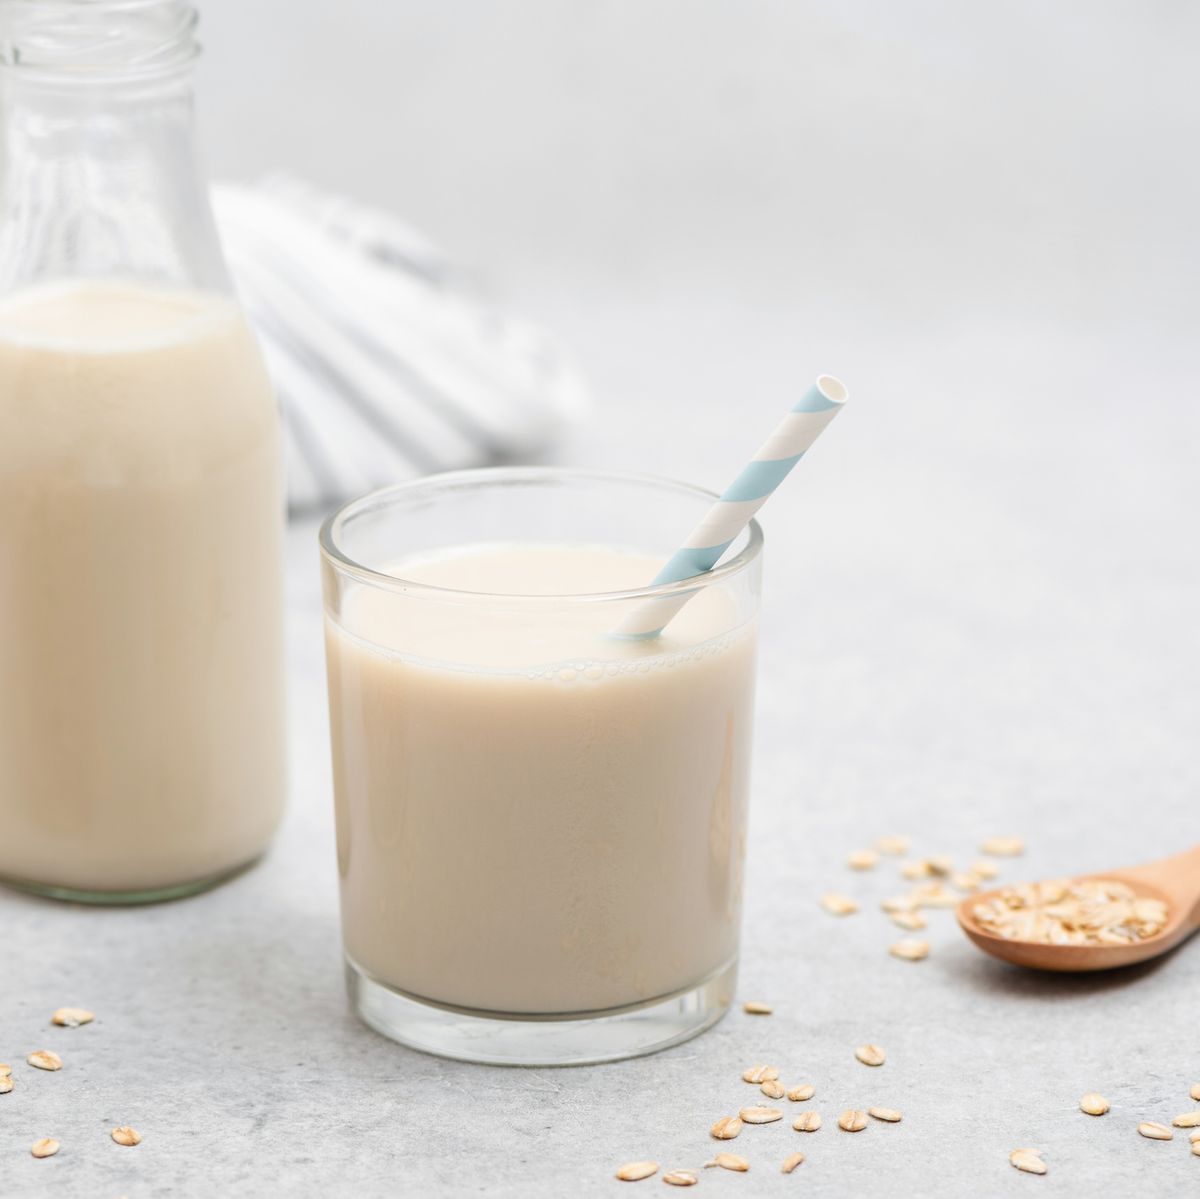 Is Oat Milk Actually Good for You?